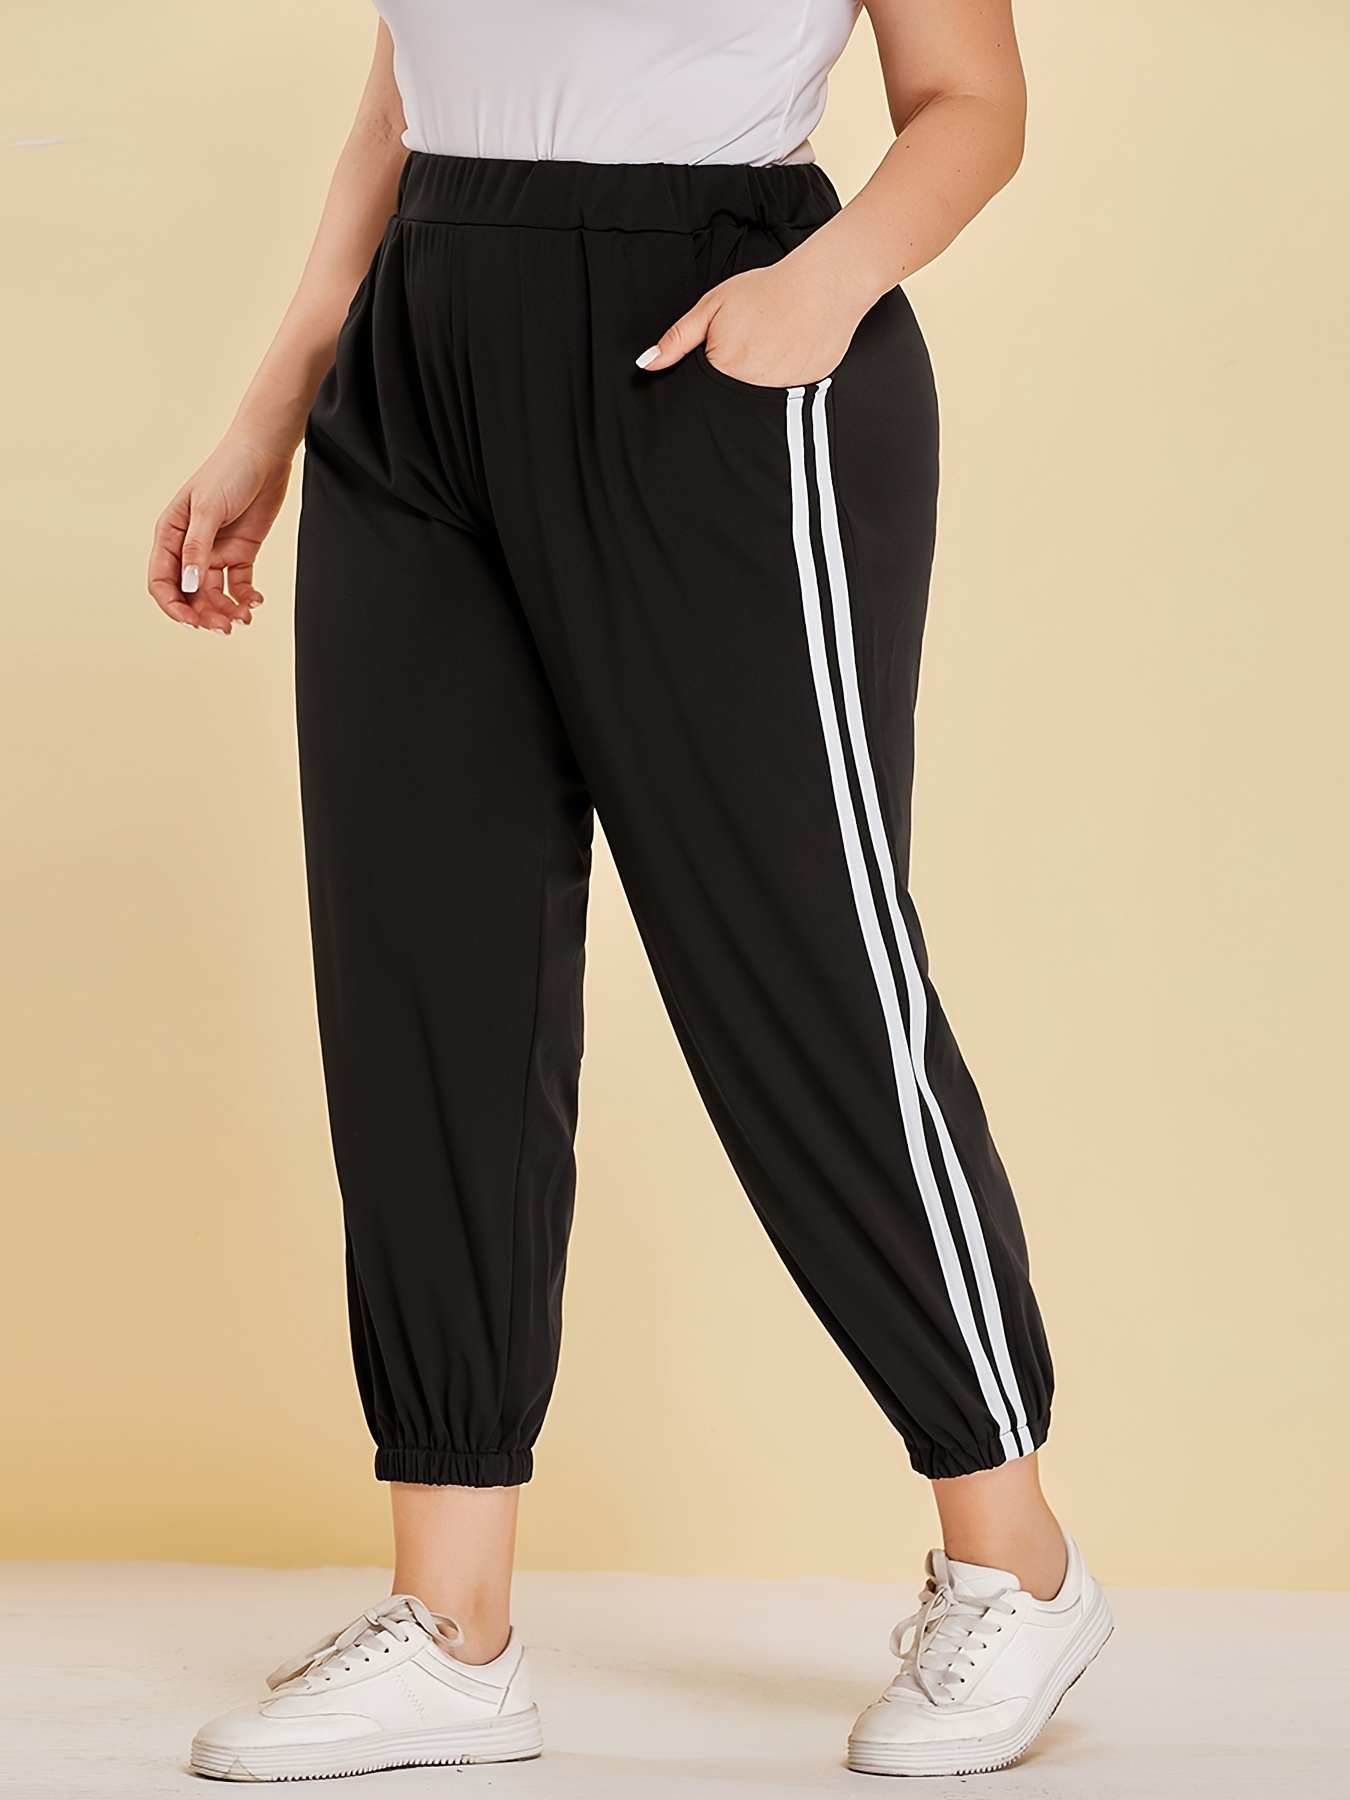 Plus Size Jogger Pant Suits for Women High Waist Athletic Workout Pants  Casual Running Pants with Pockets